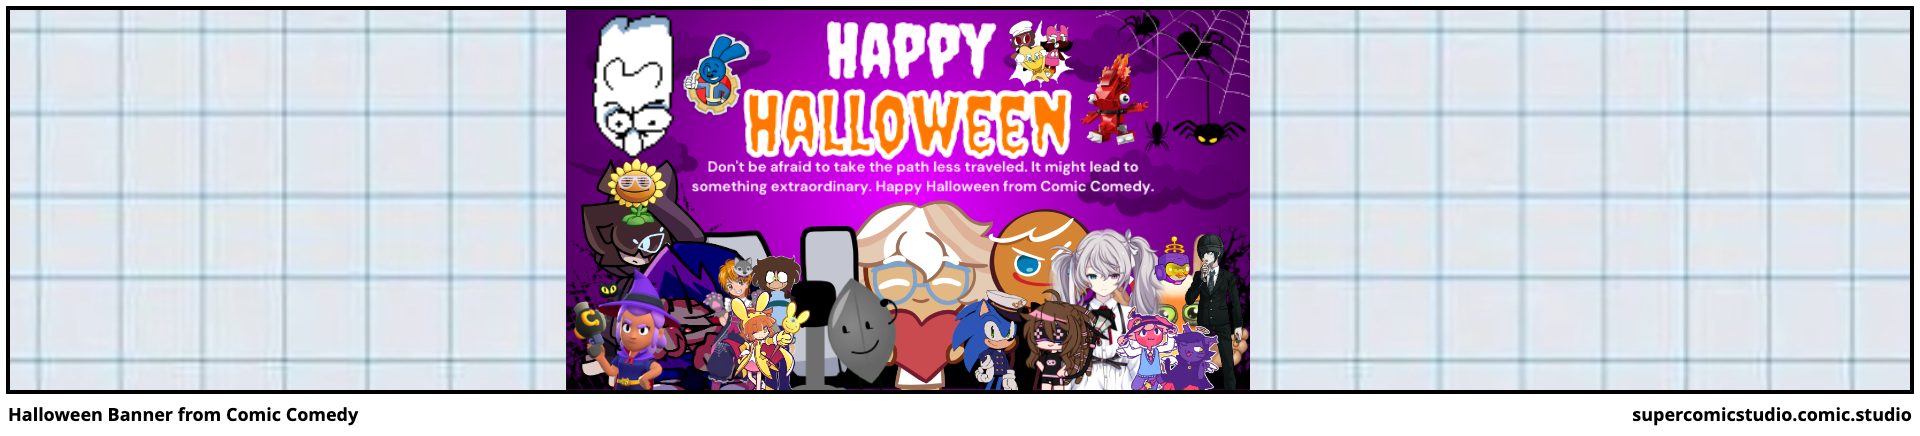 Halloween Banner from Comic Comedy